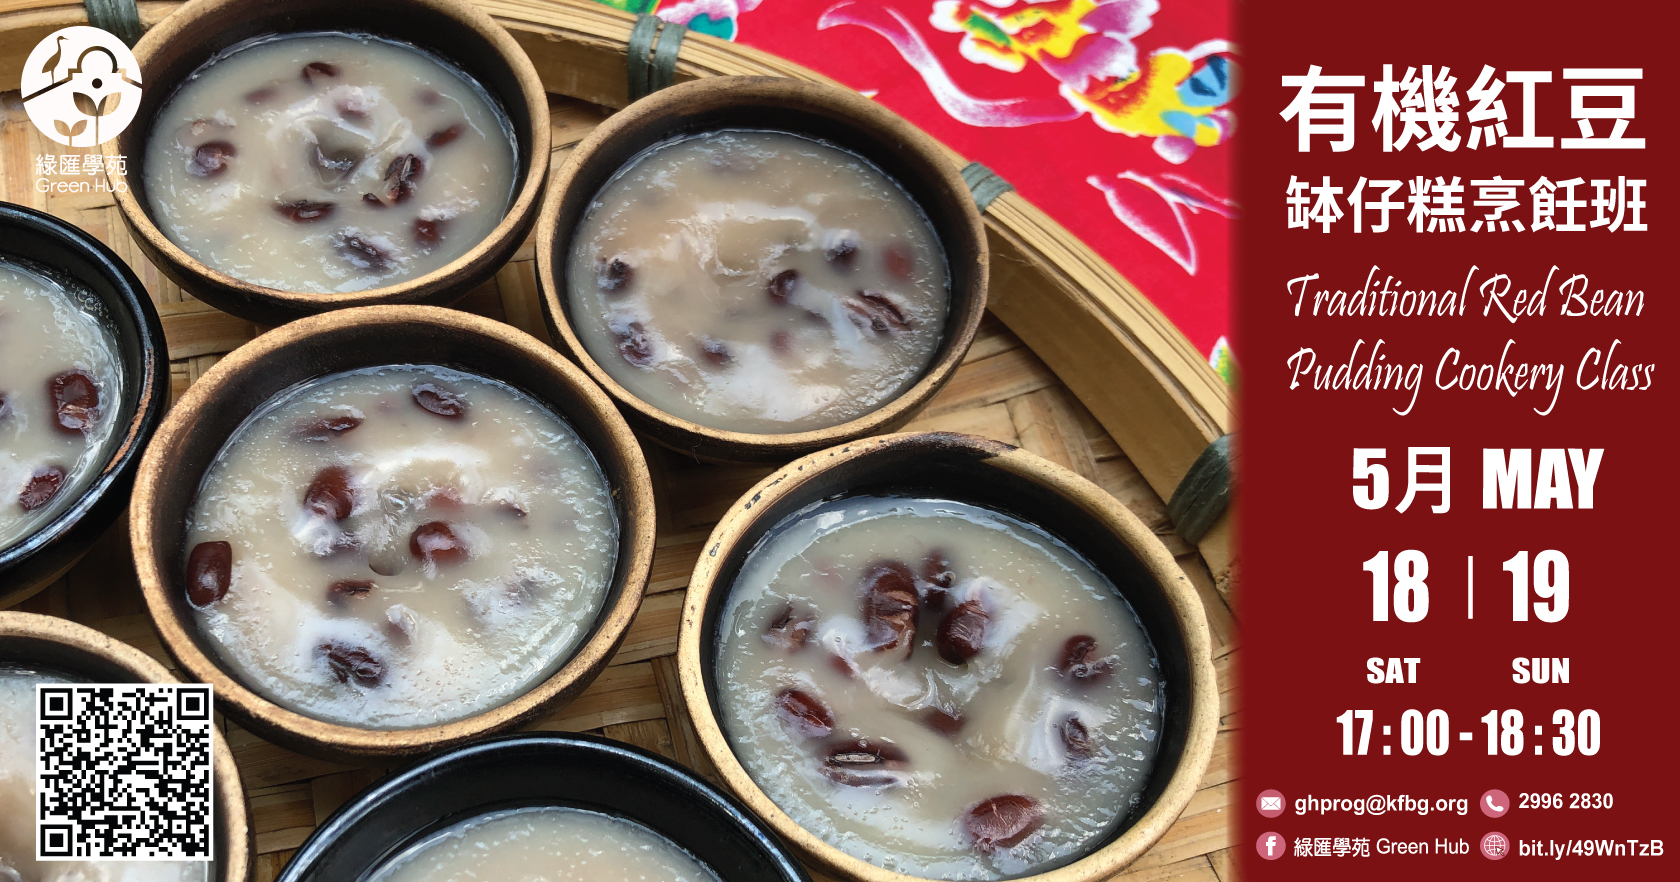 Flyer_red-bean-pudding-Cookery-Class_FB